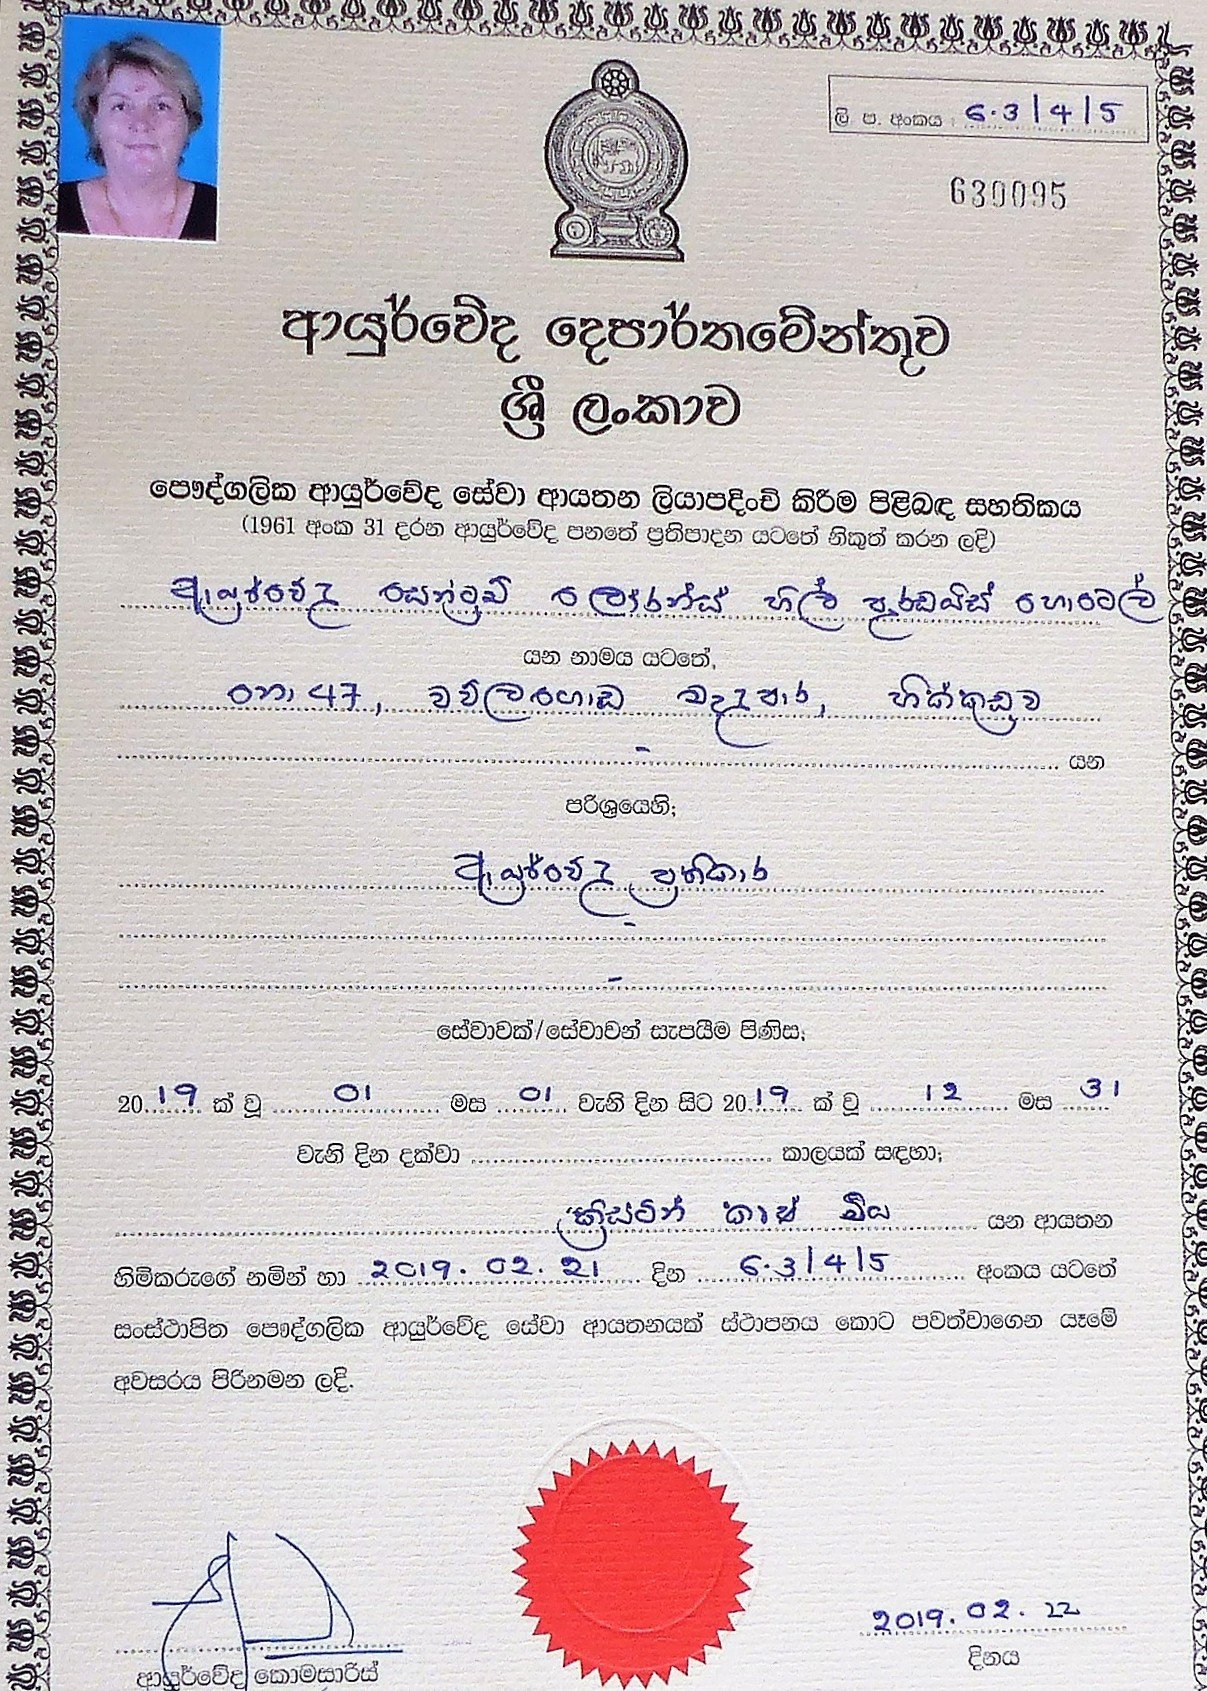 Certificate of Regisration from Department of Ayurvedha